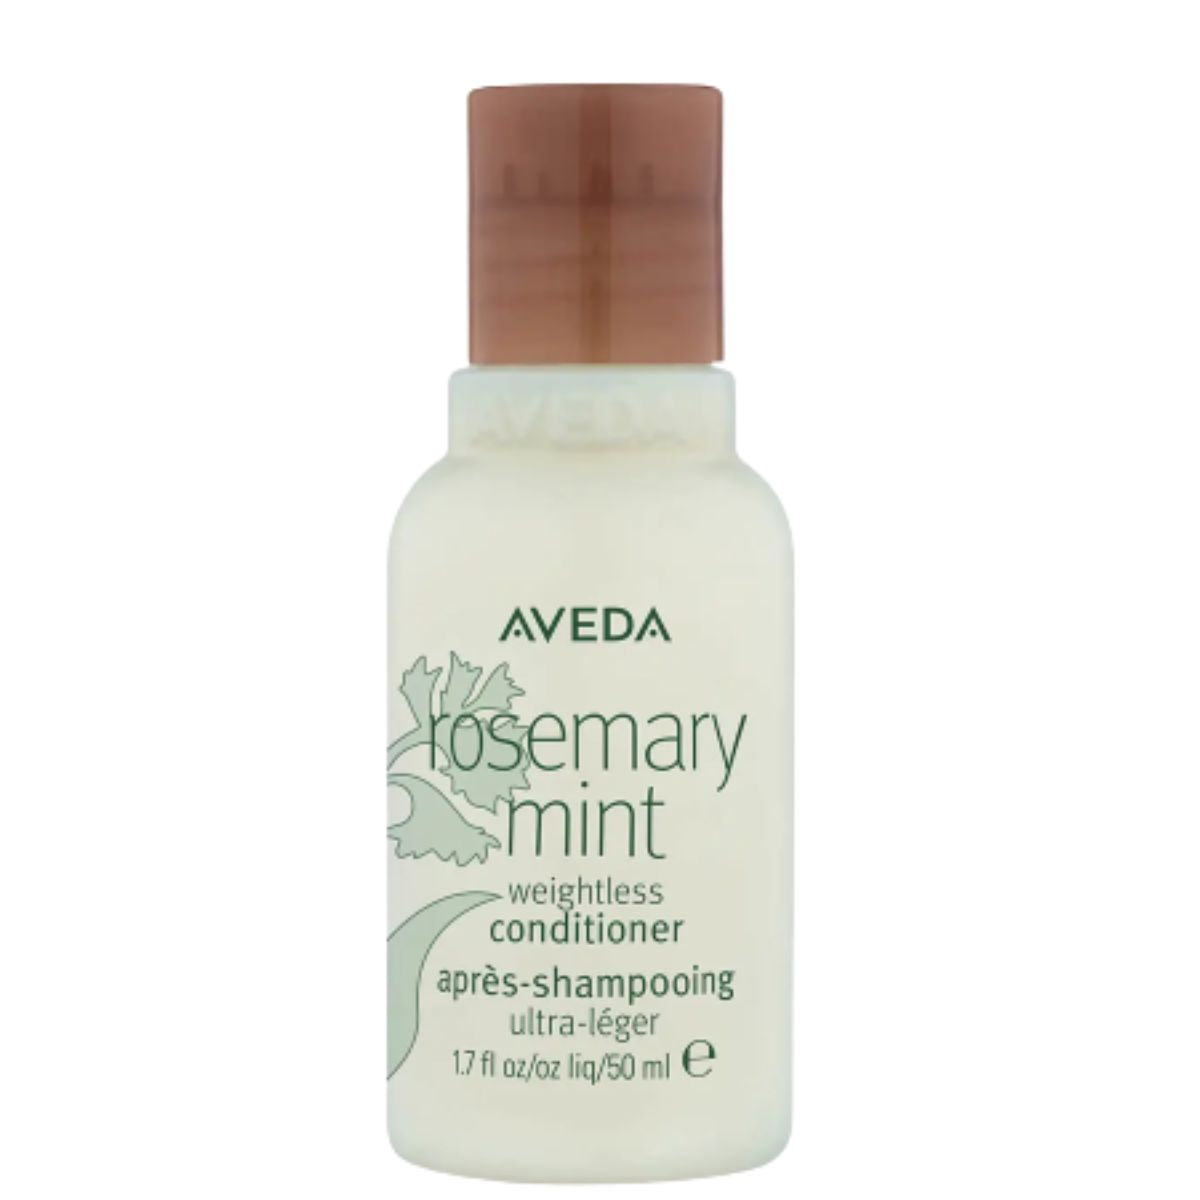 AVEDA Rosemary Mint Weightless Conditioner Travel Size